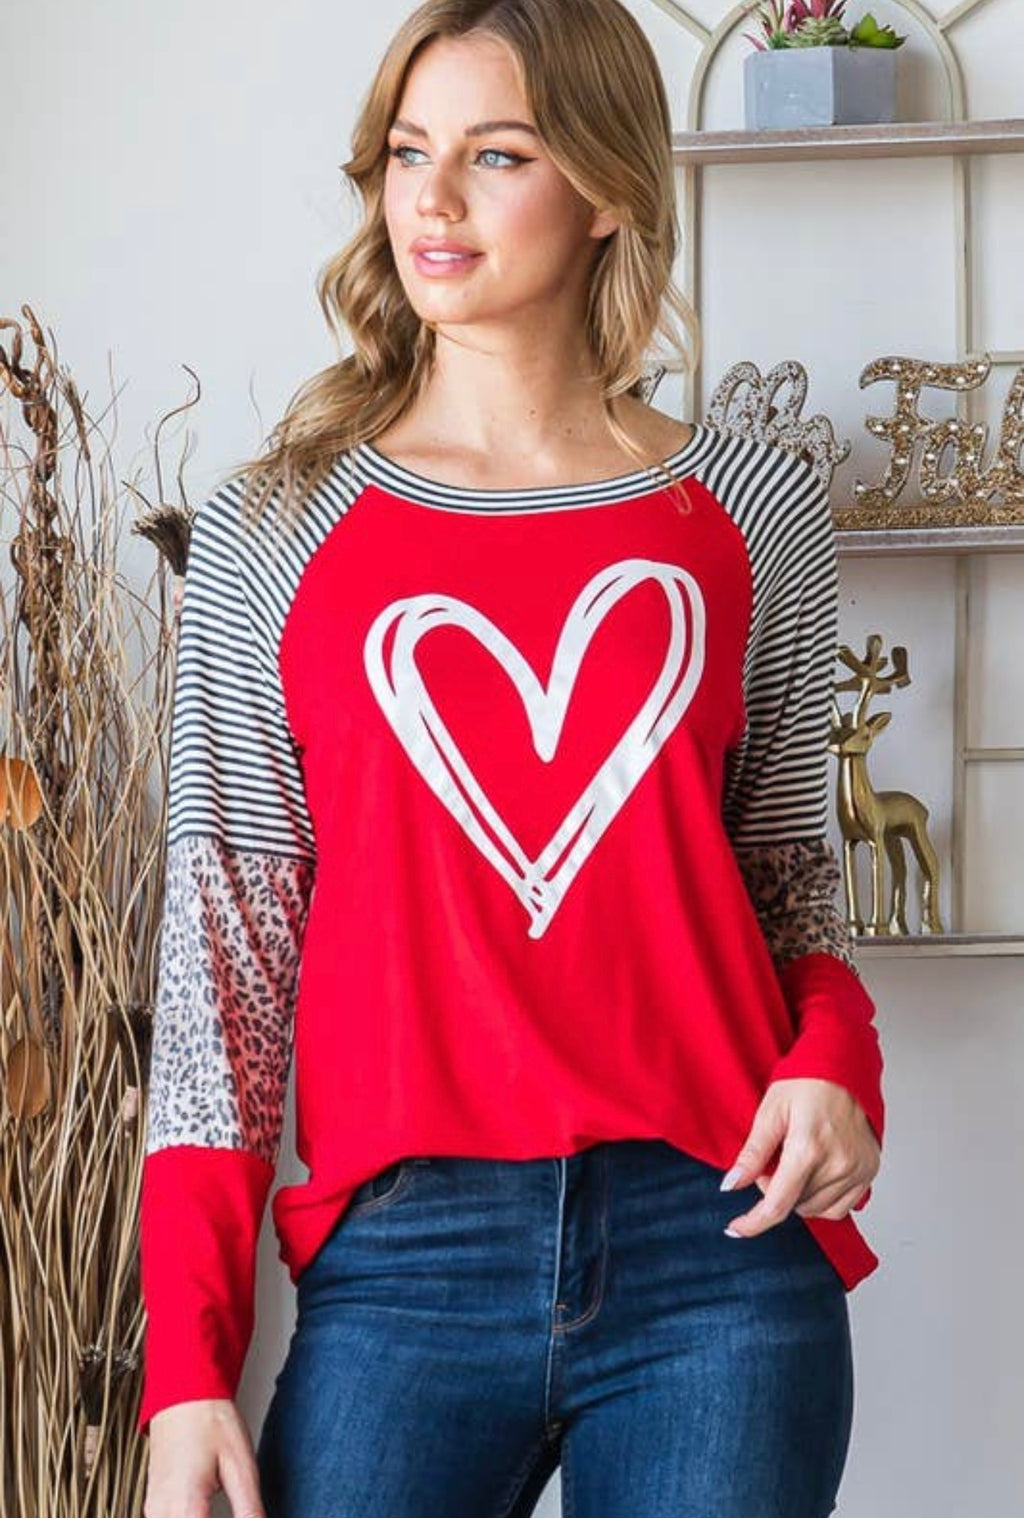 LONG SLEEVE ROUND NECK SOLID TOP WITH HEART SHAPE, LEOPARD DETAIL AND STRIPE CONTRAST - Lil Monkey Boutique